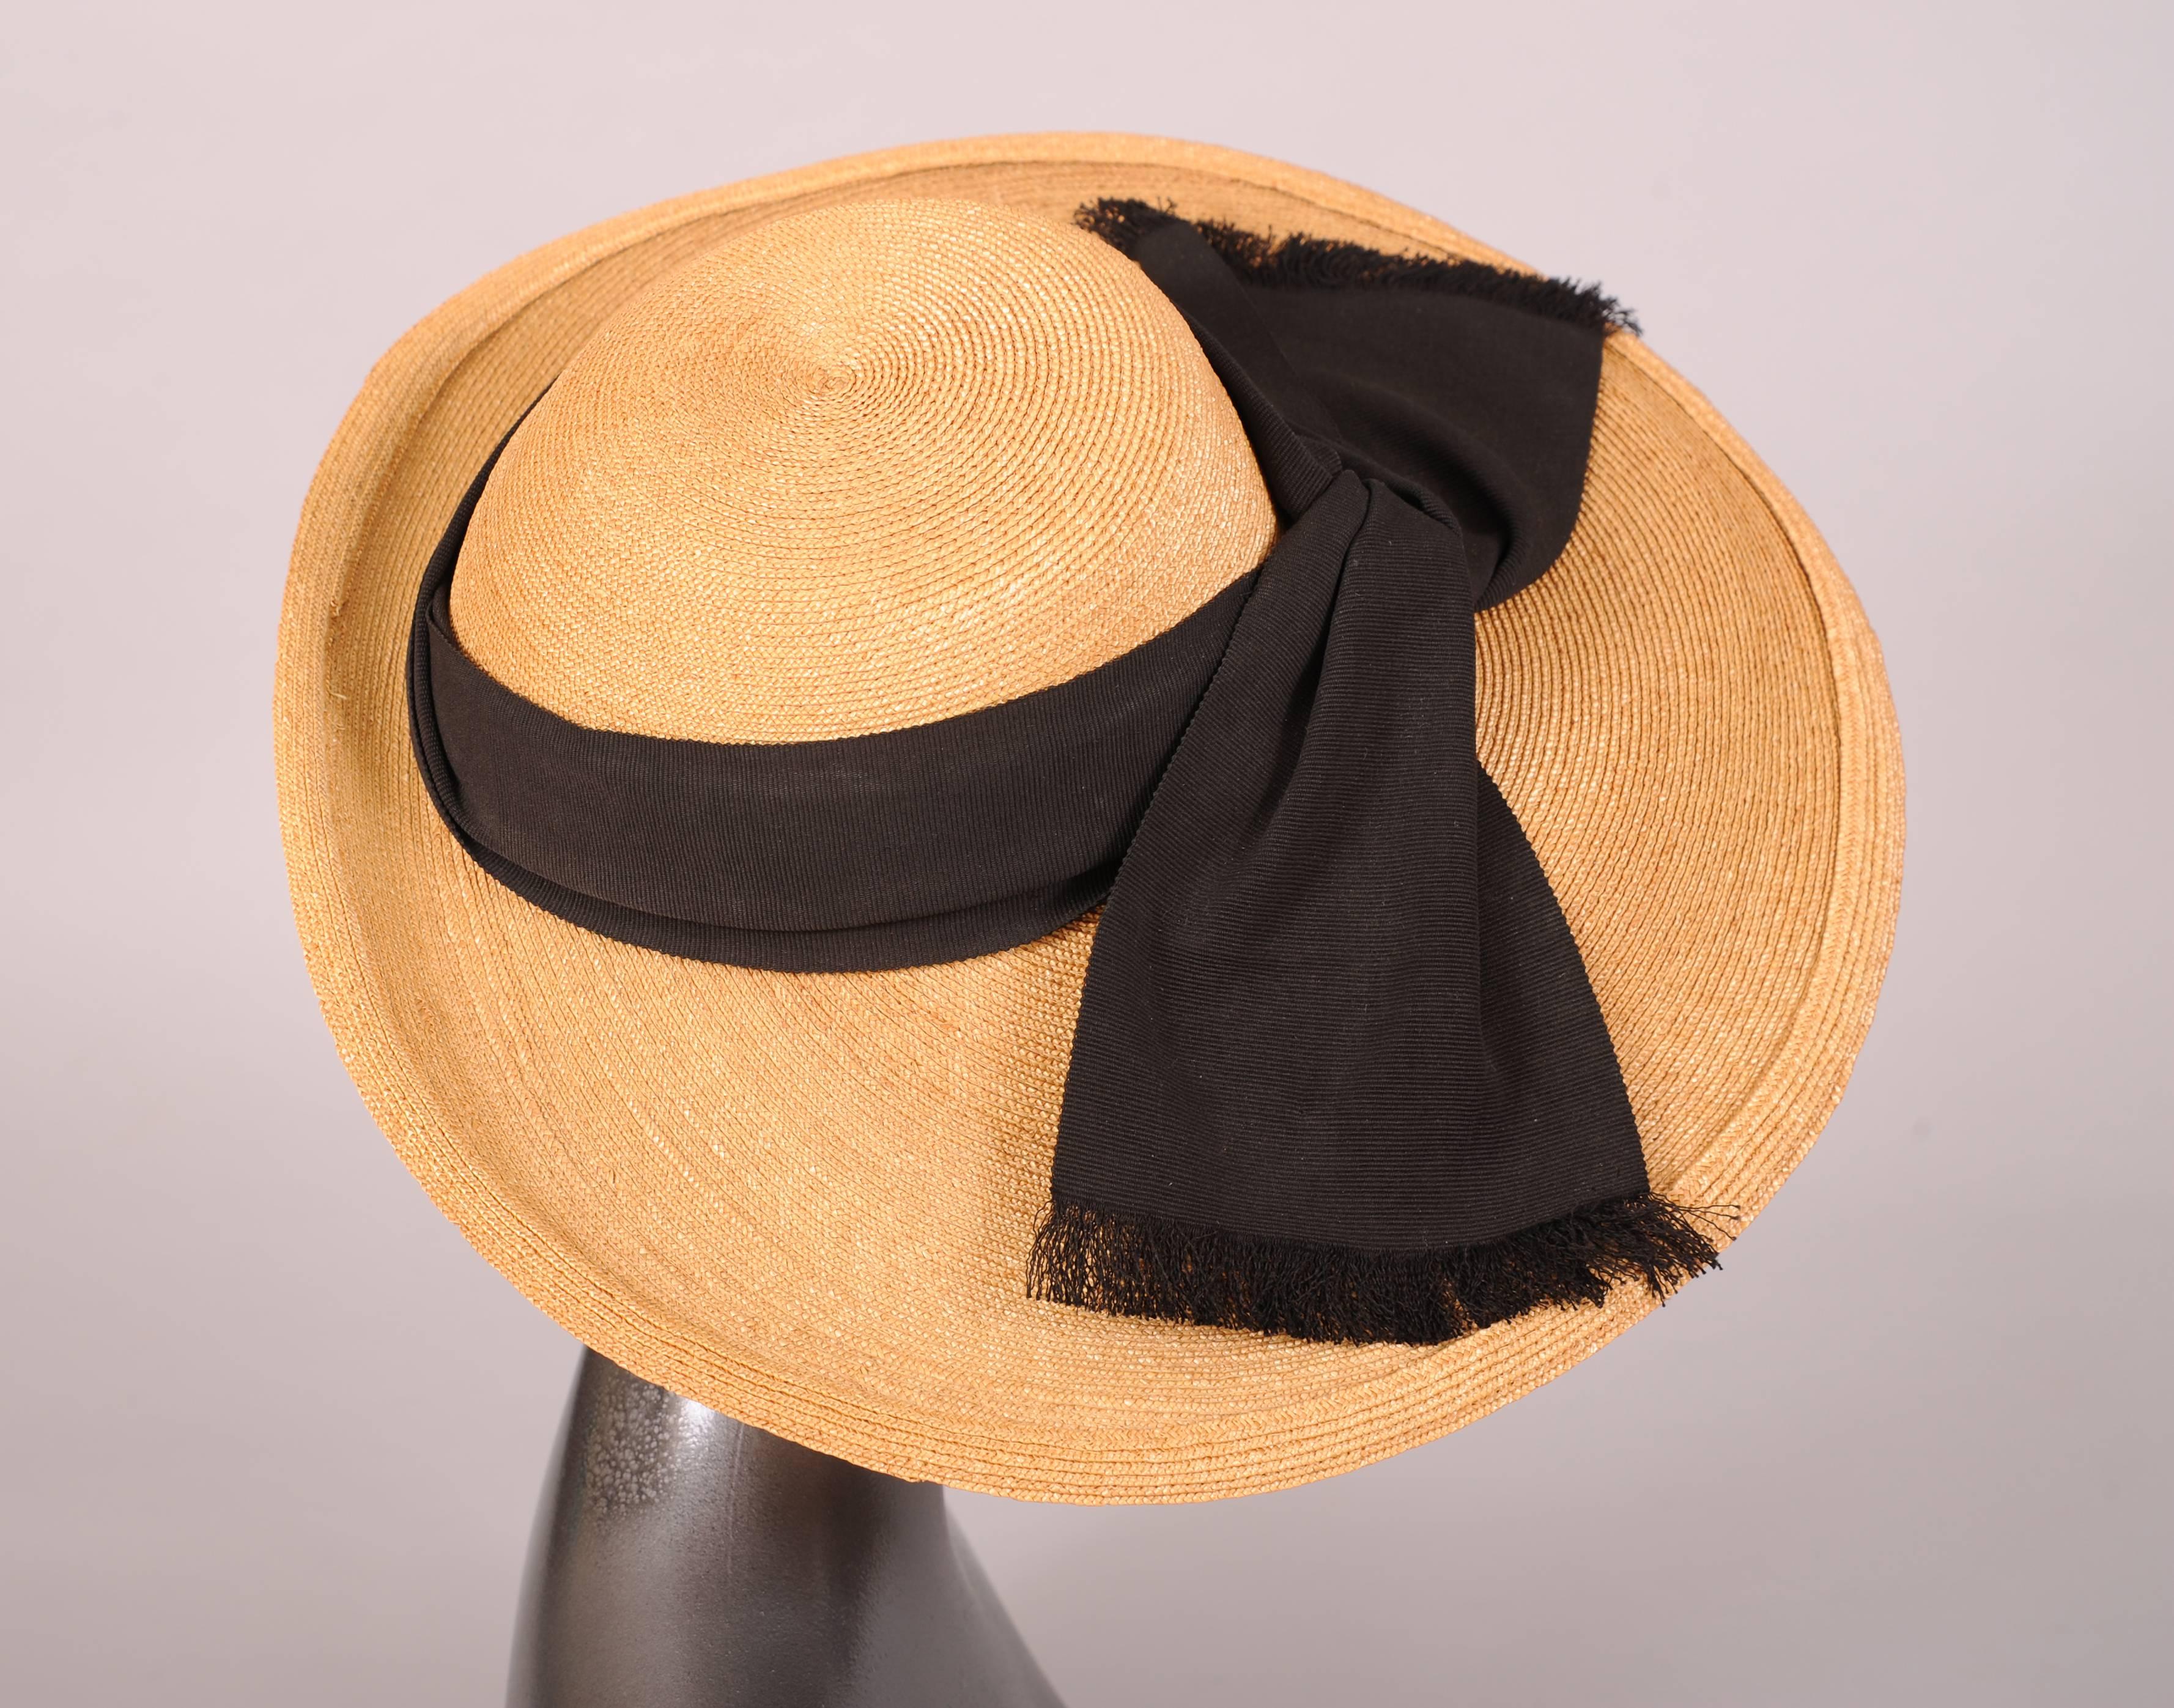 A sweet summer hat in natural straw with a wide brim in front, this hat is decorated with a wide black gros grain ribbon wrapping the crown. A casual knot is at the center front and the ribbon has fringed edges. It is in excellent condition and was